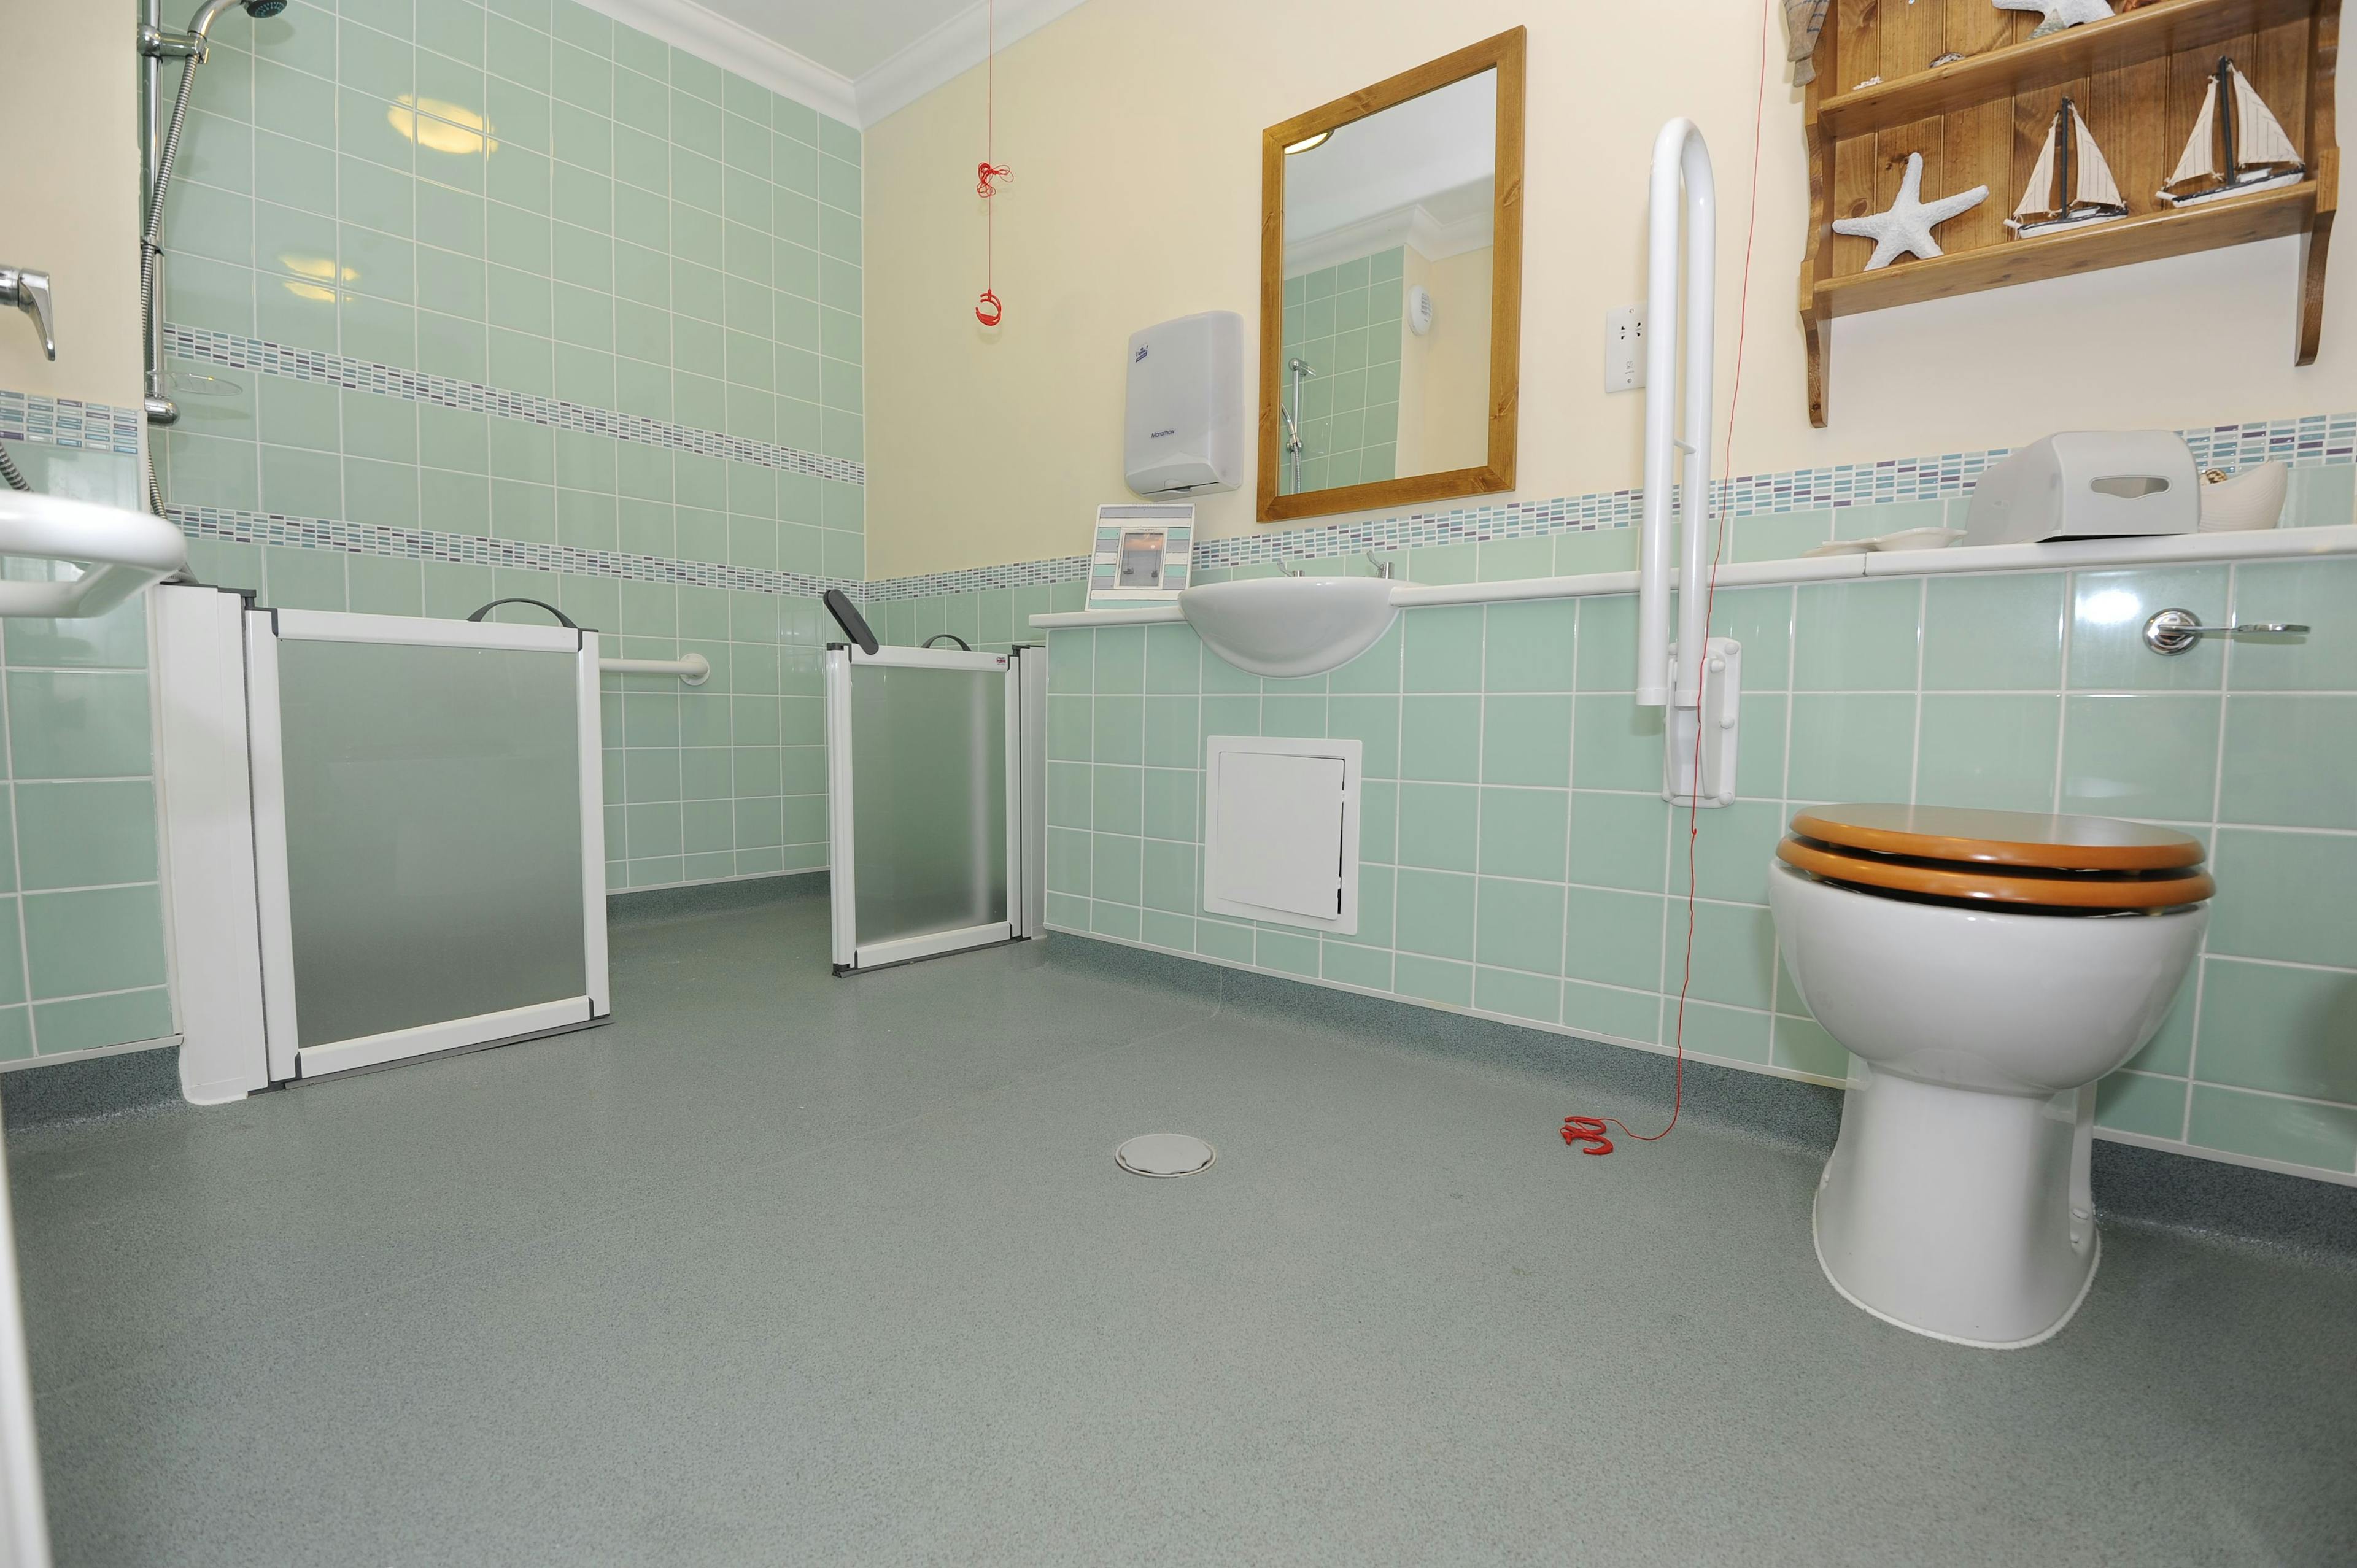 Bathroom at Ritson Lodge Care Home in Gorleston-on-Sea, Great Yarmouth